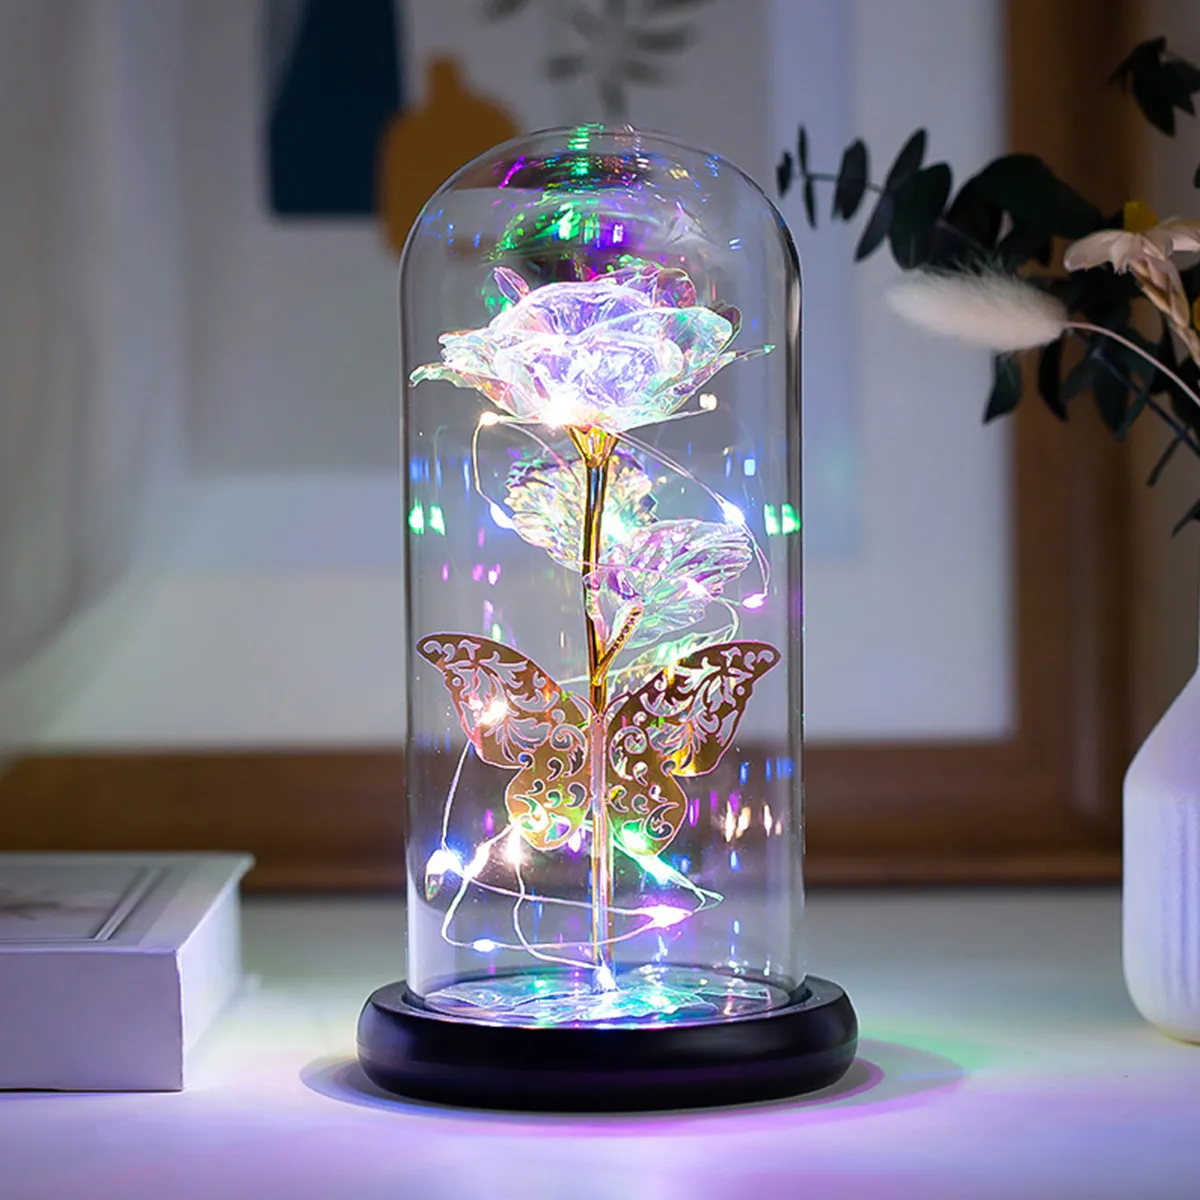 Galaxy Rose Lamp with Butterfly and Colorful LED Rose Flowers In Glass Dome